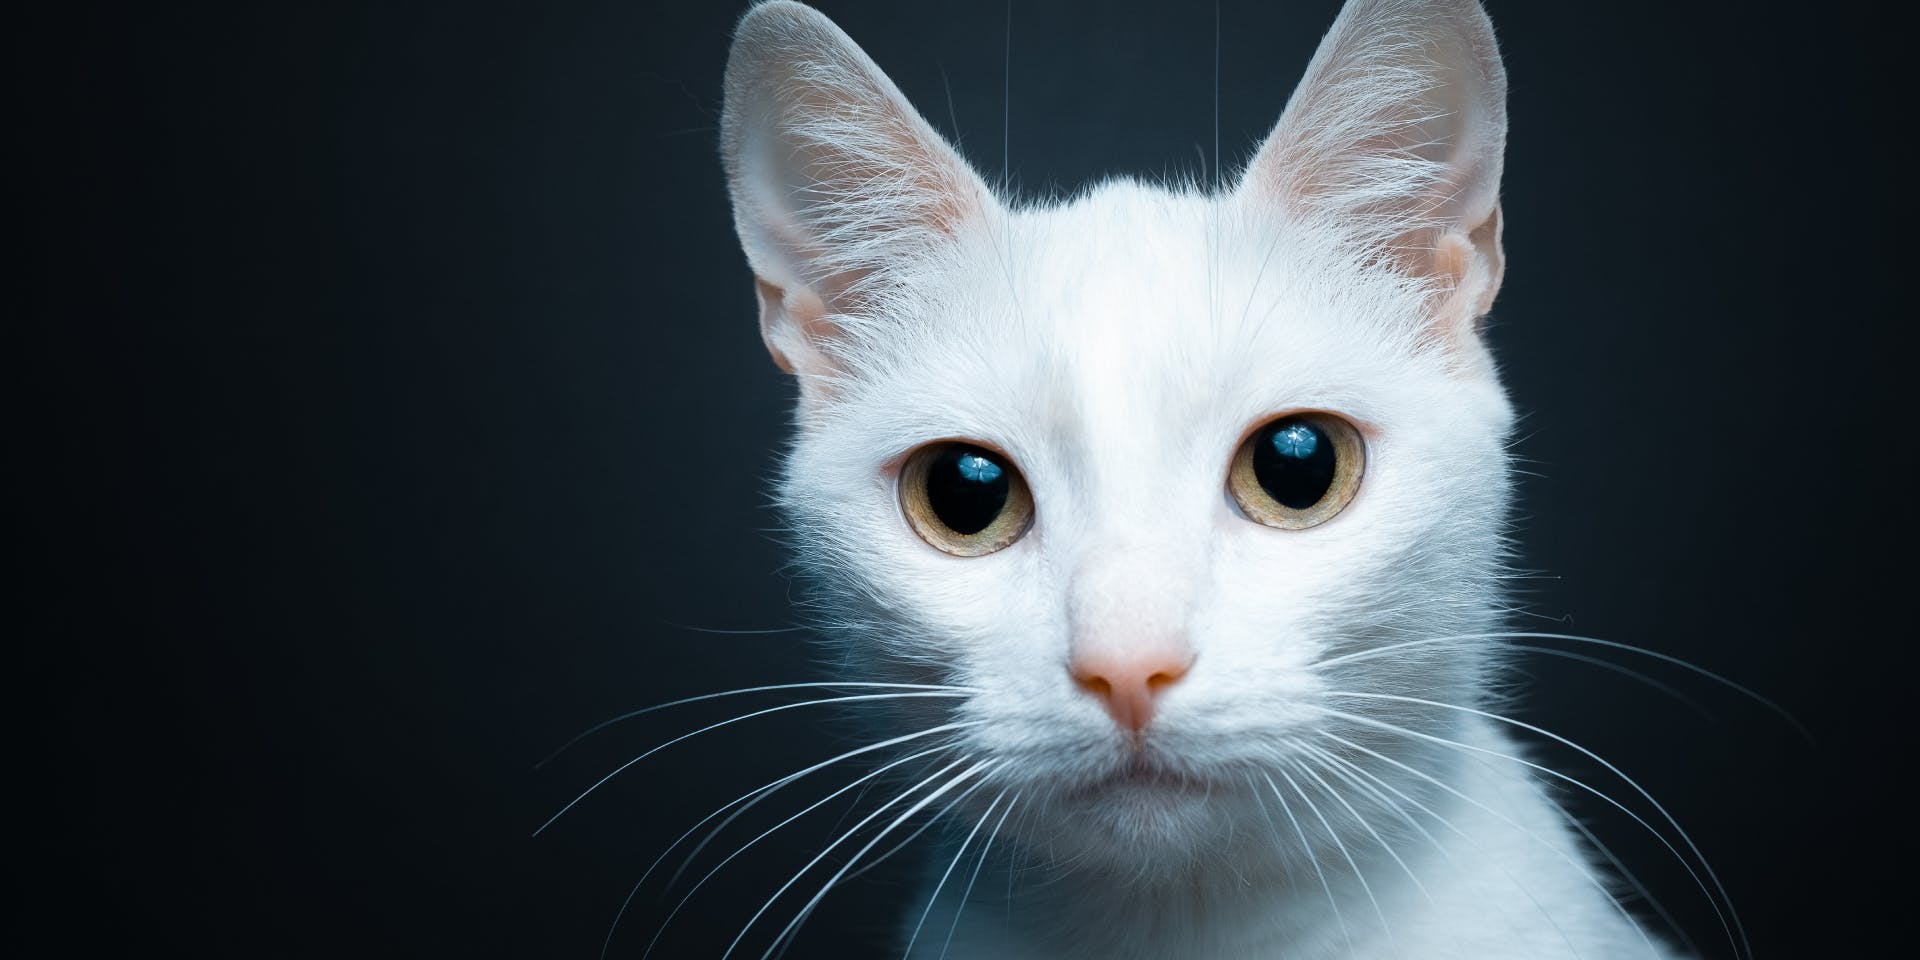 A short-haired white cat looking at the camera.